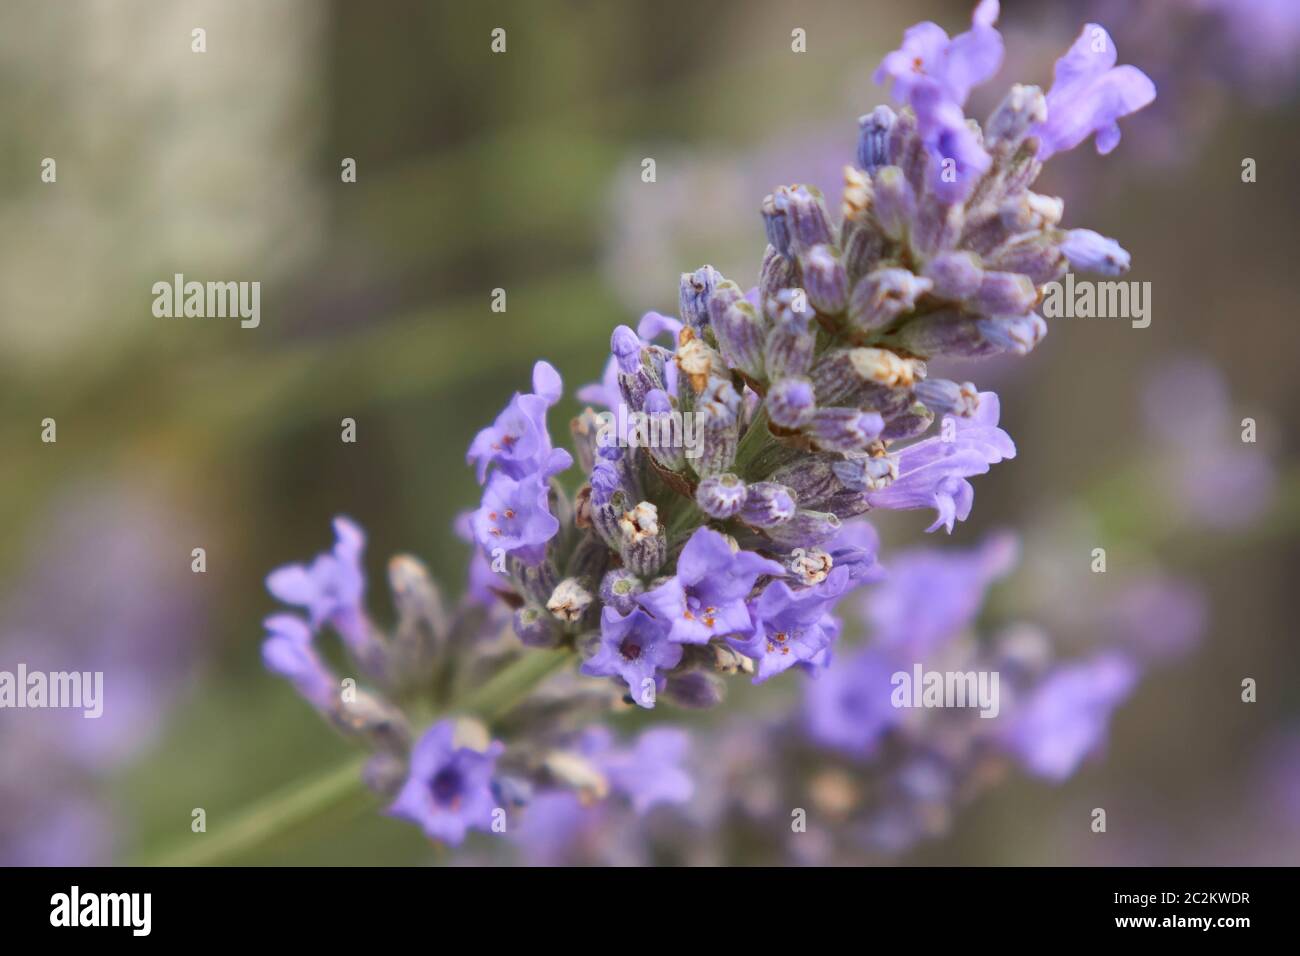 Lavender flower in a fantastic detail with macro shot, where you can see all the smallest details of this fragrant flower. Stock Photo